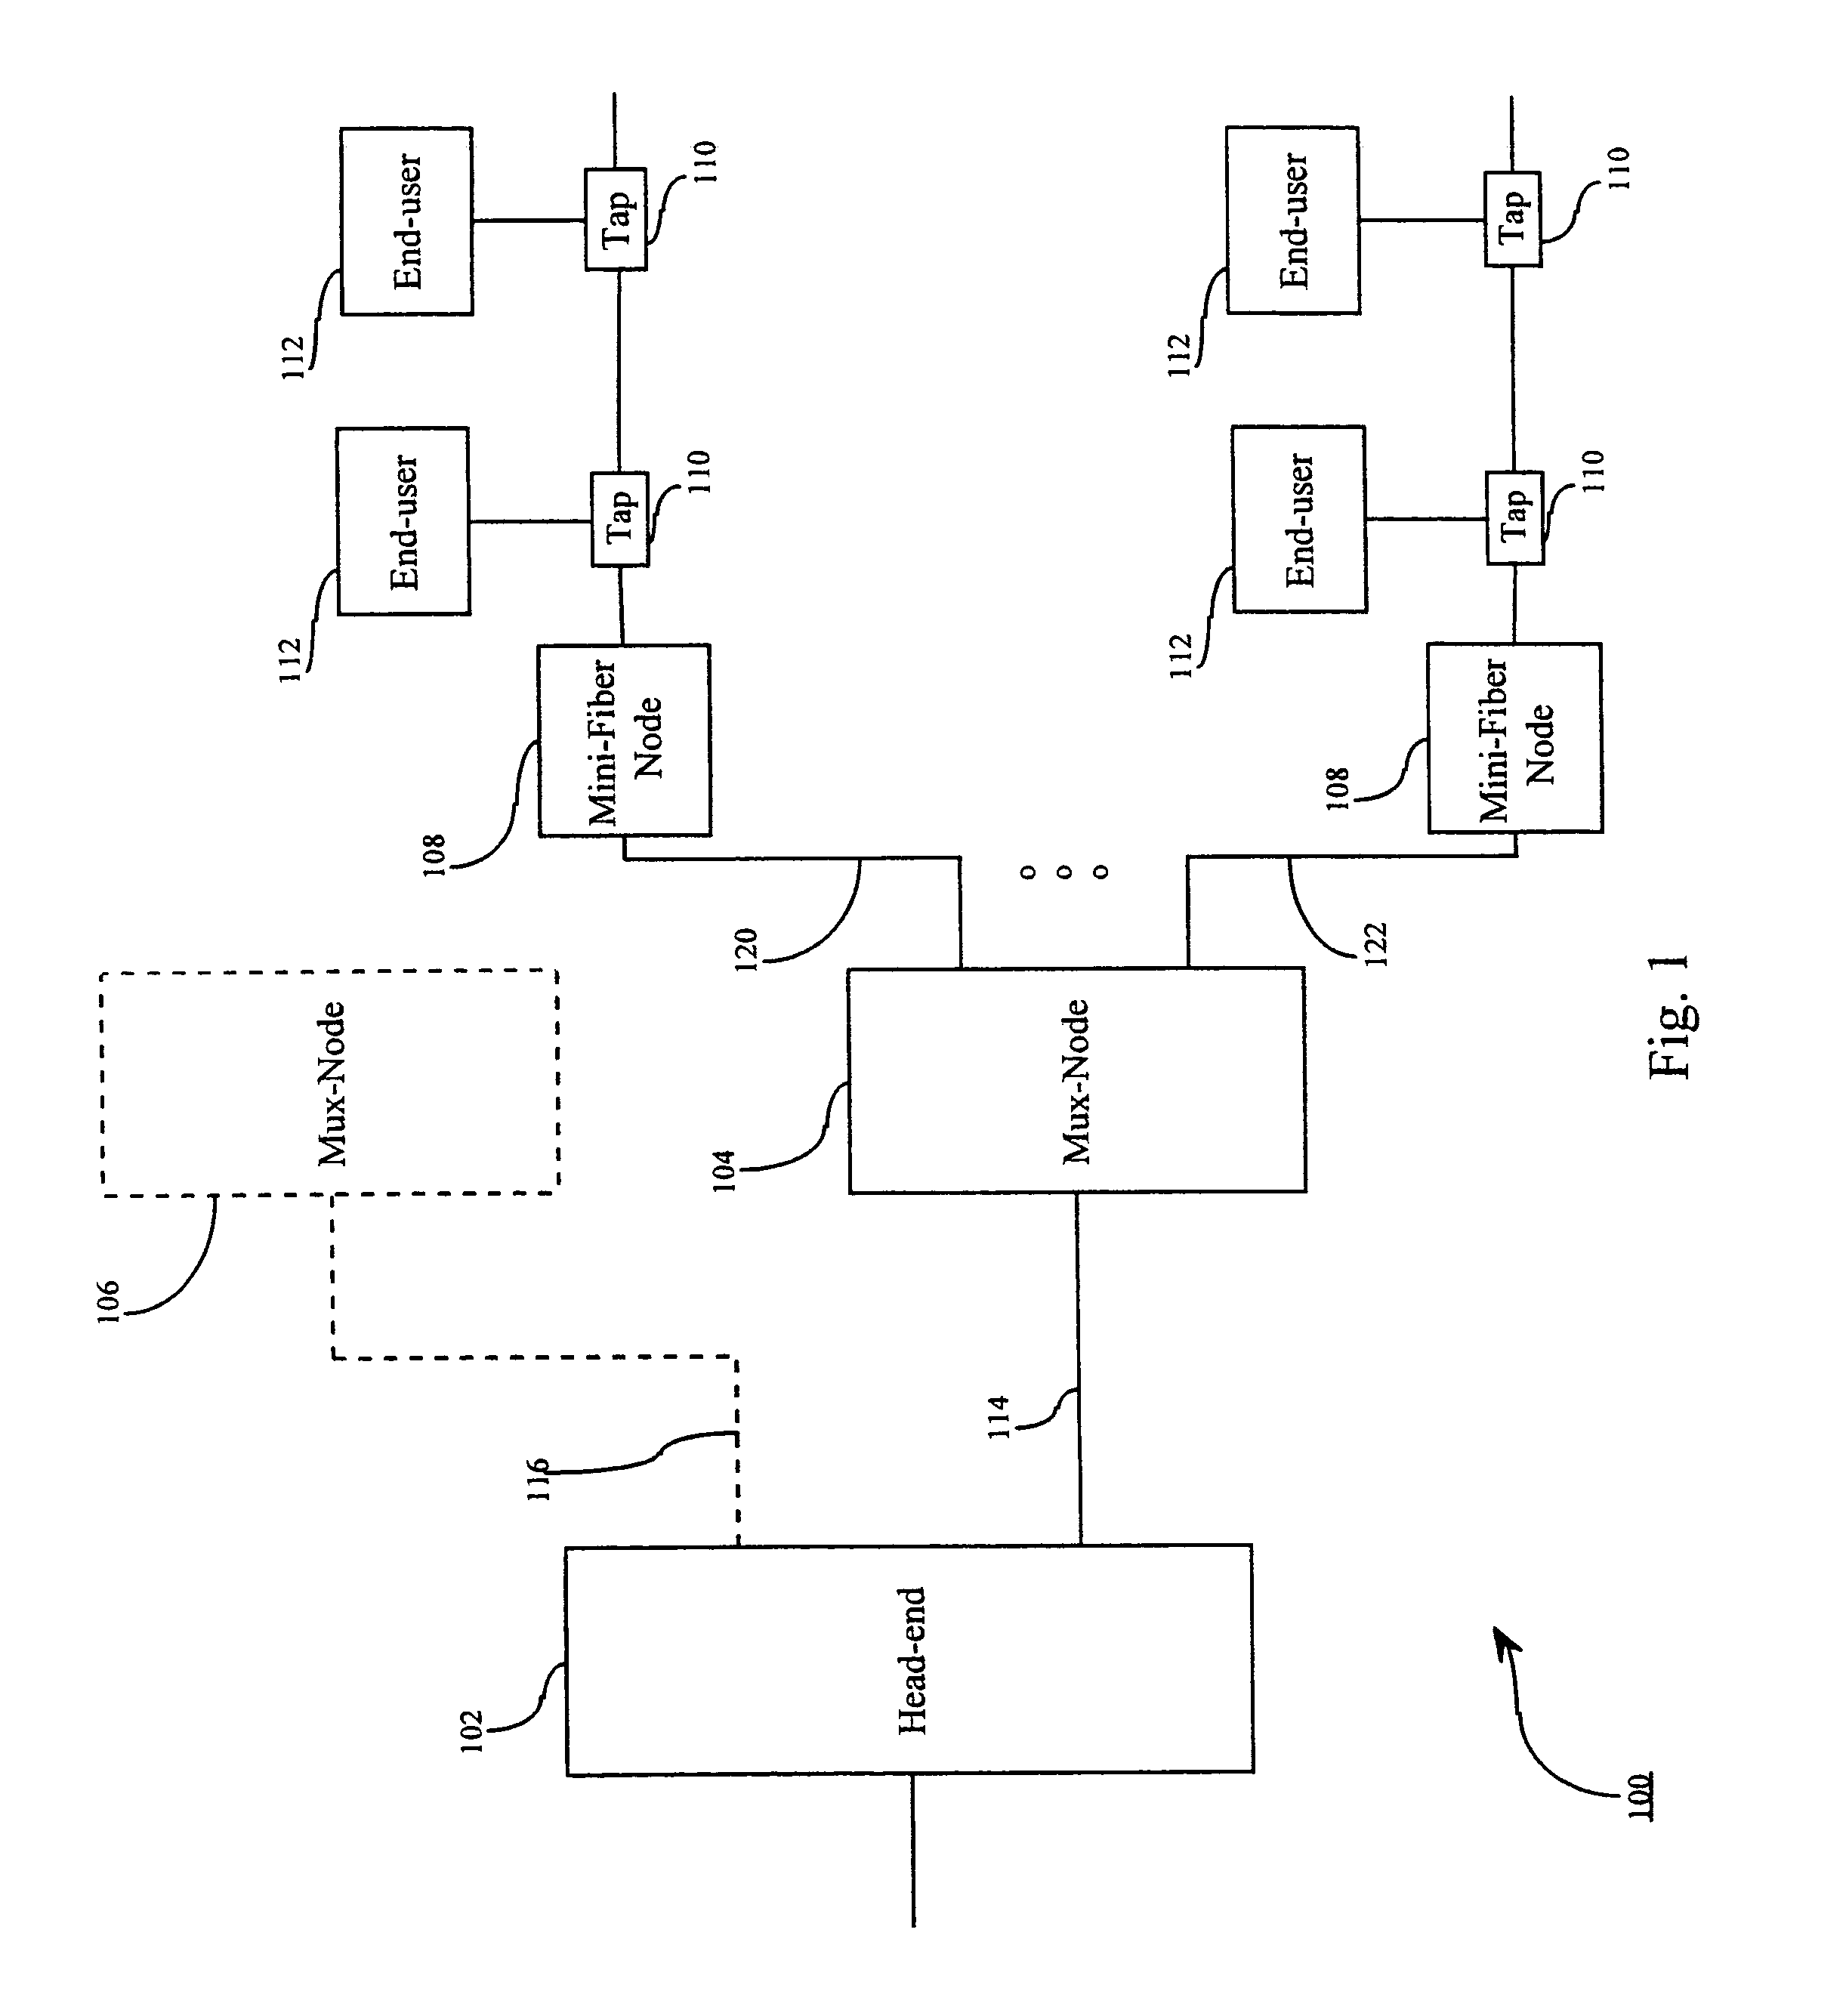 Fiber and wire communication system